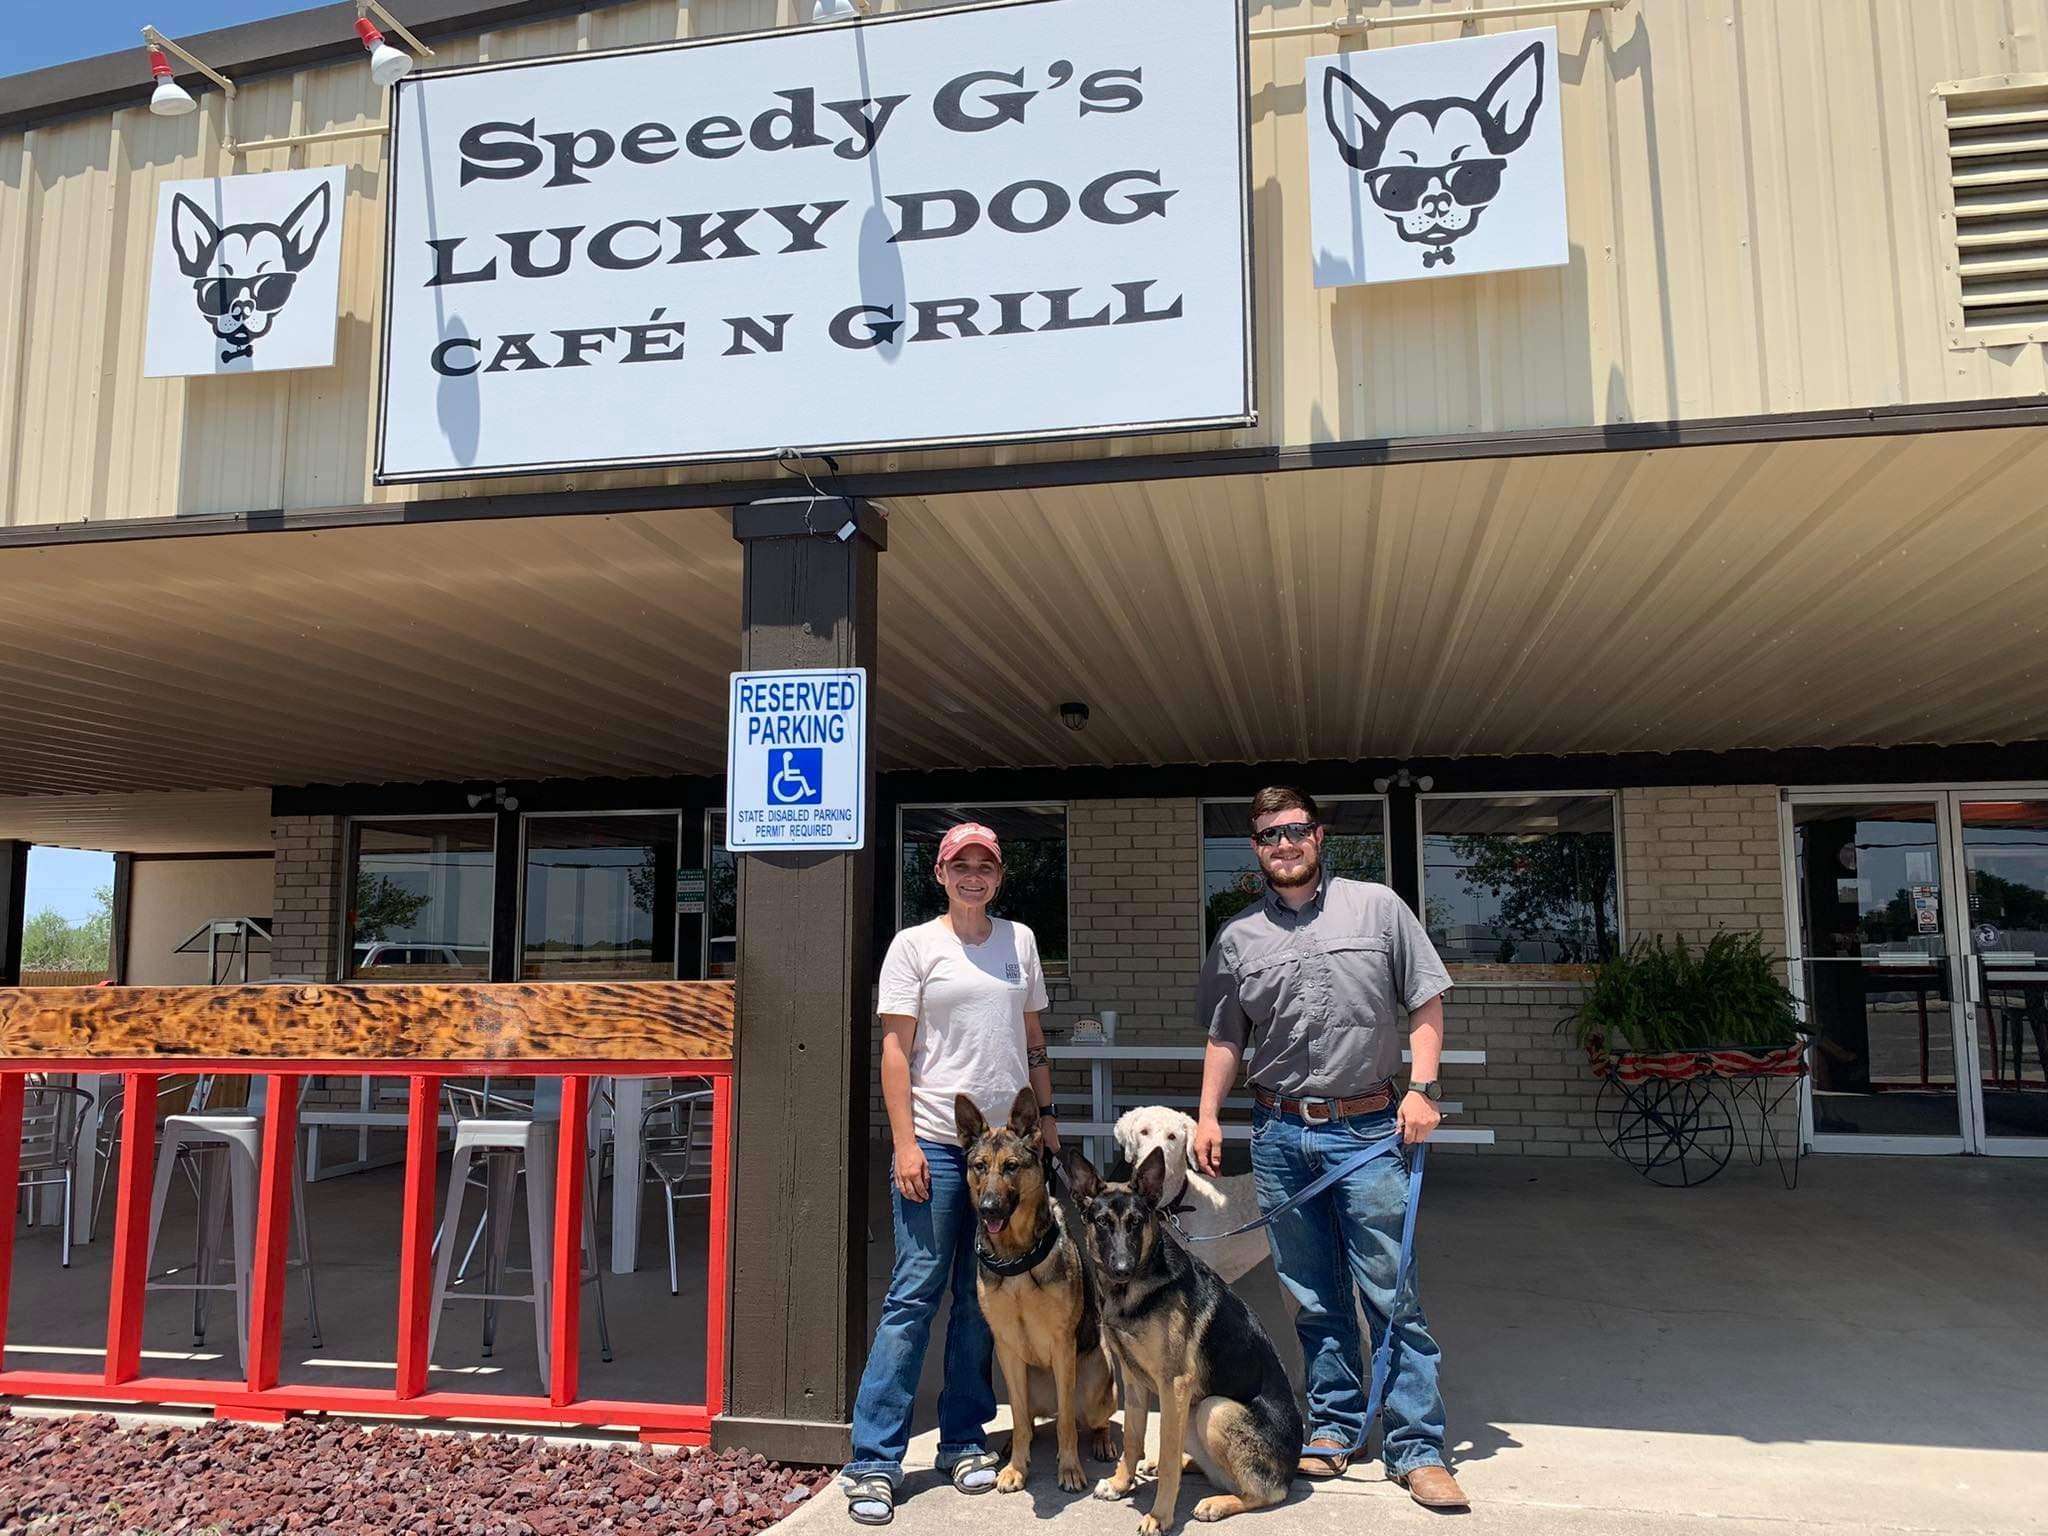 Pet Friendly Speedy G's Lucky Dog Cafe and Grill